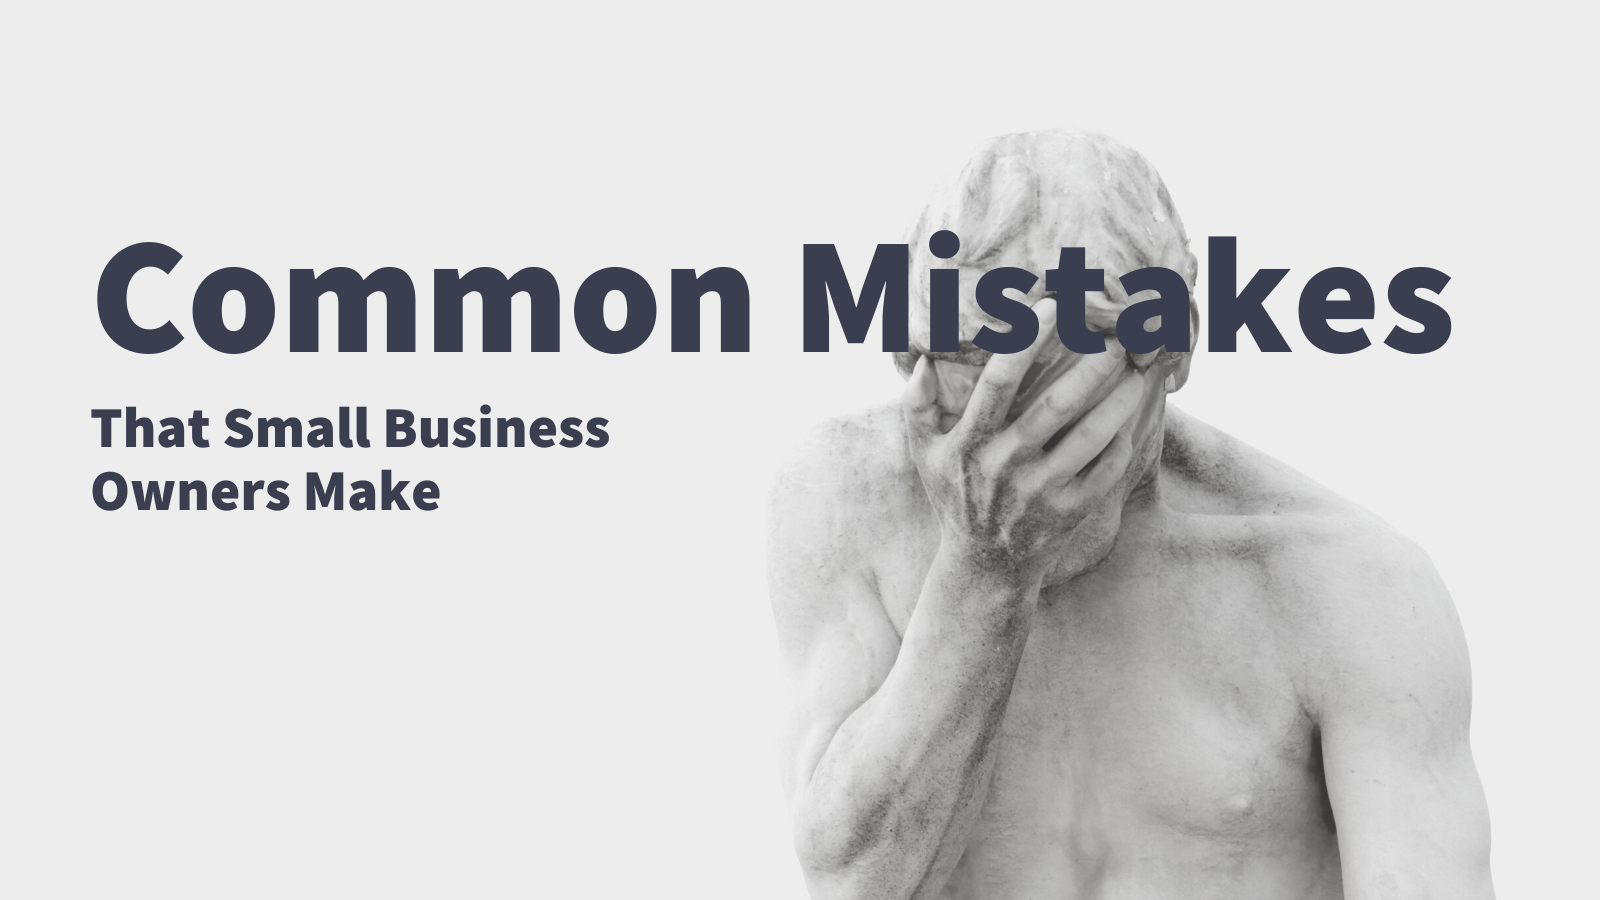 Q&A: Common Mistakes Growing Small Business Owners Make